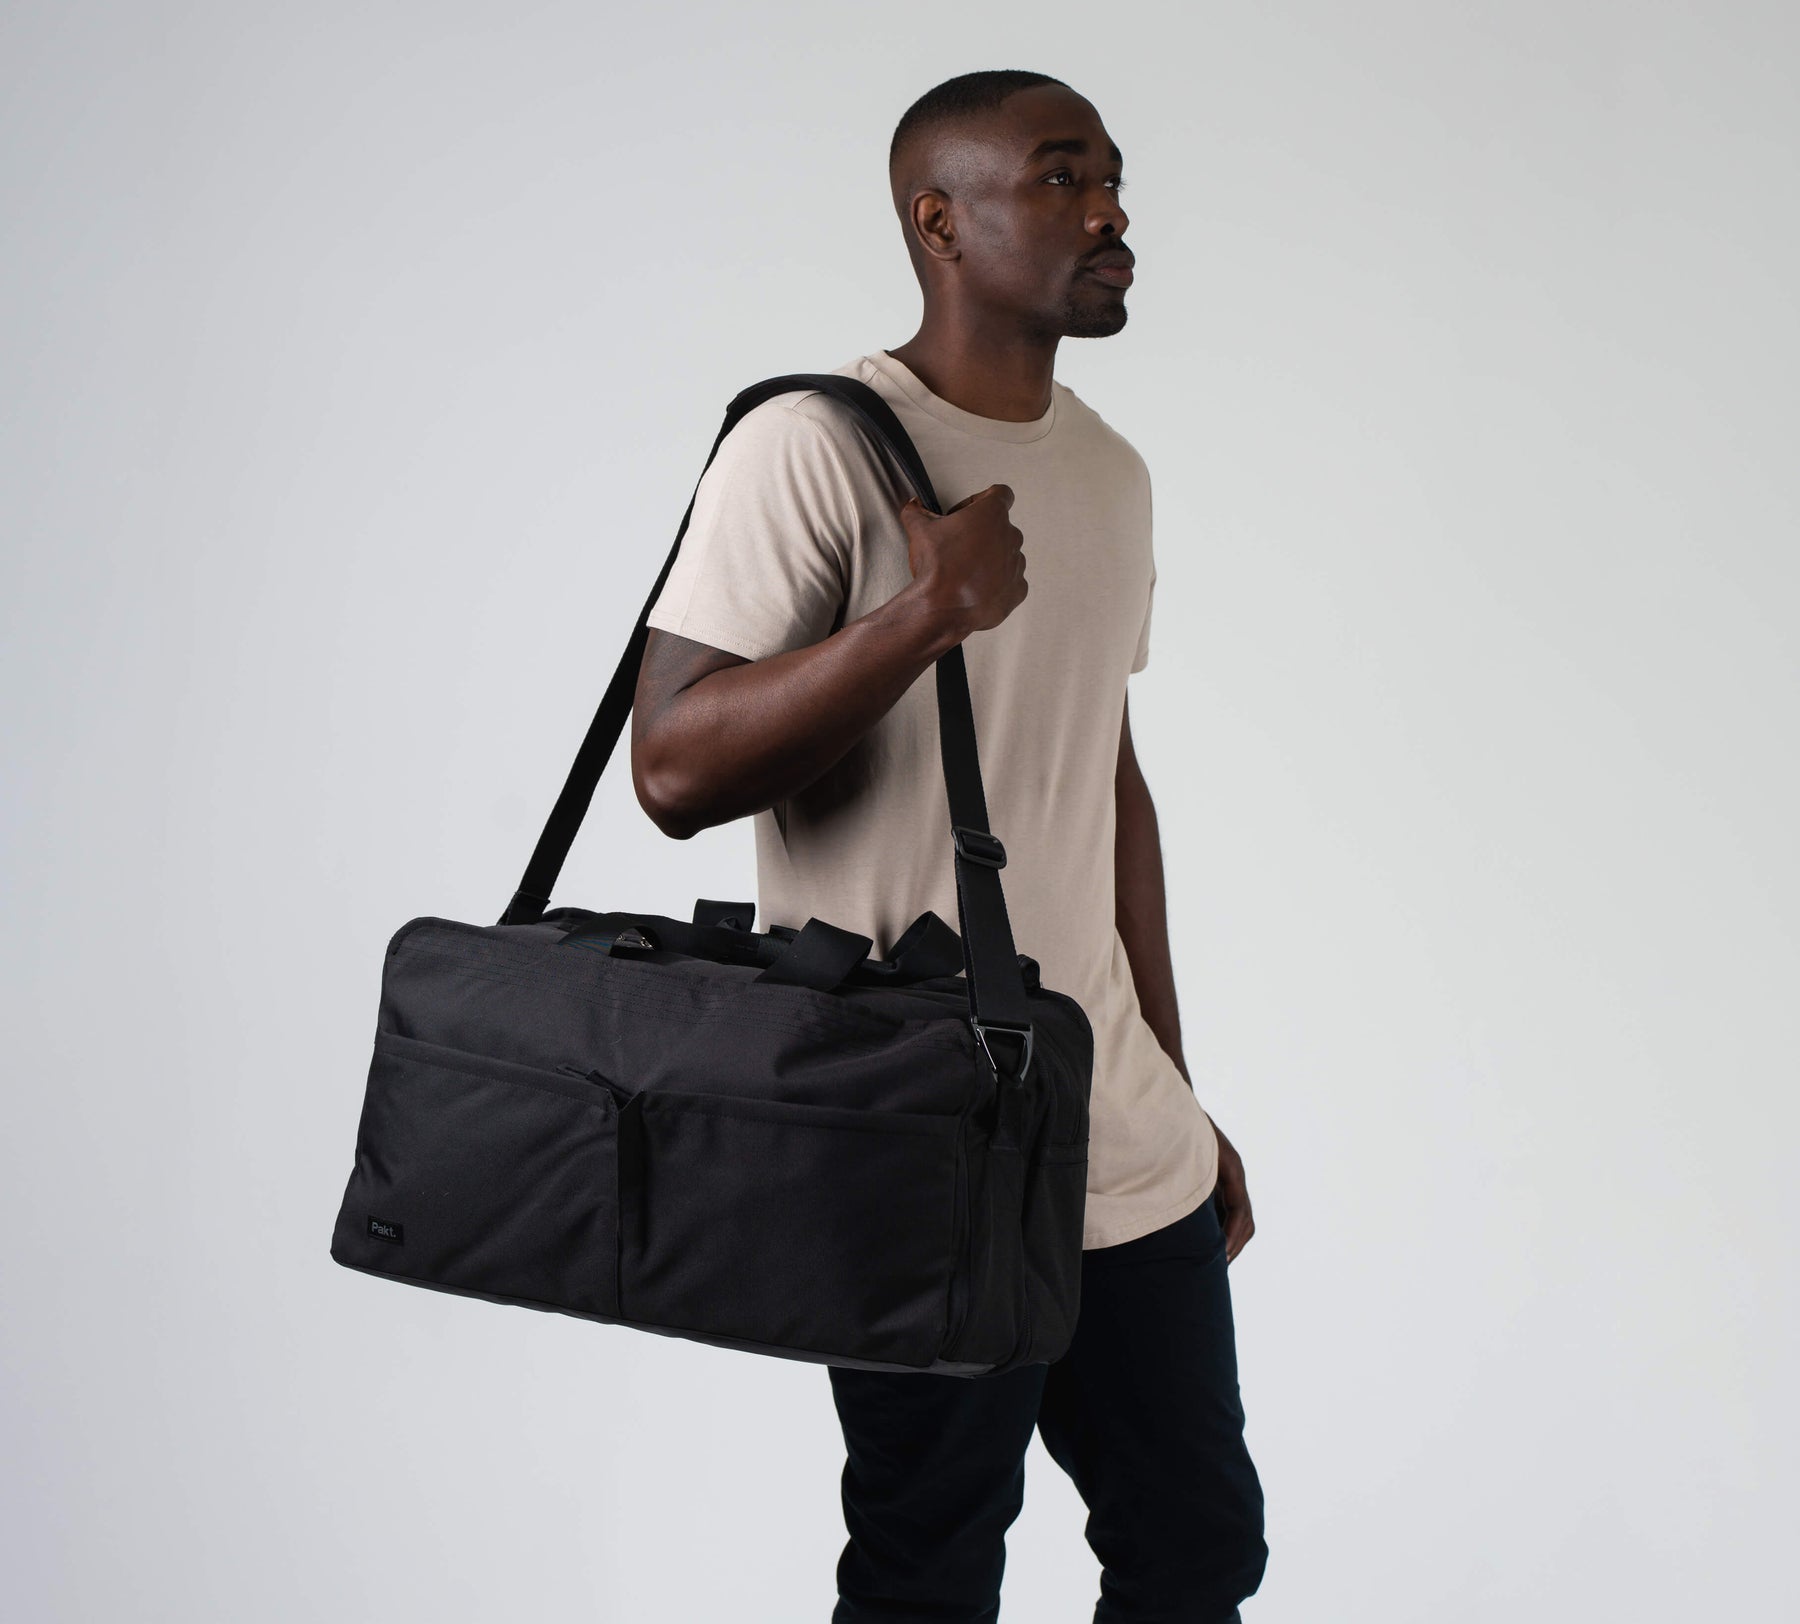 the 50L travel backpack/duffel includes a long, padded shoulder strap